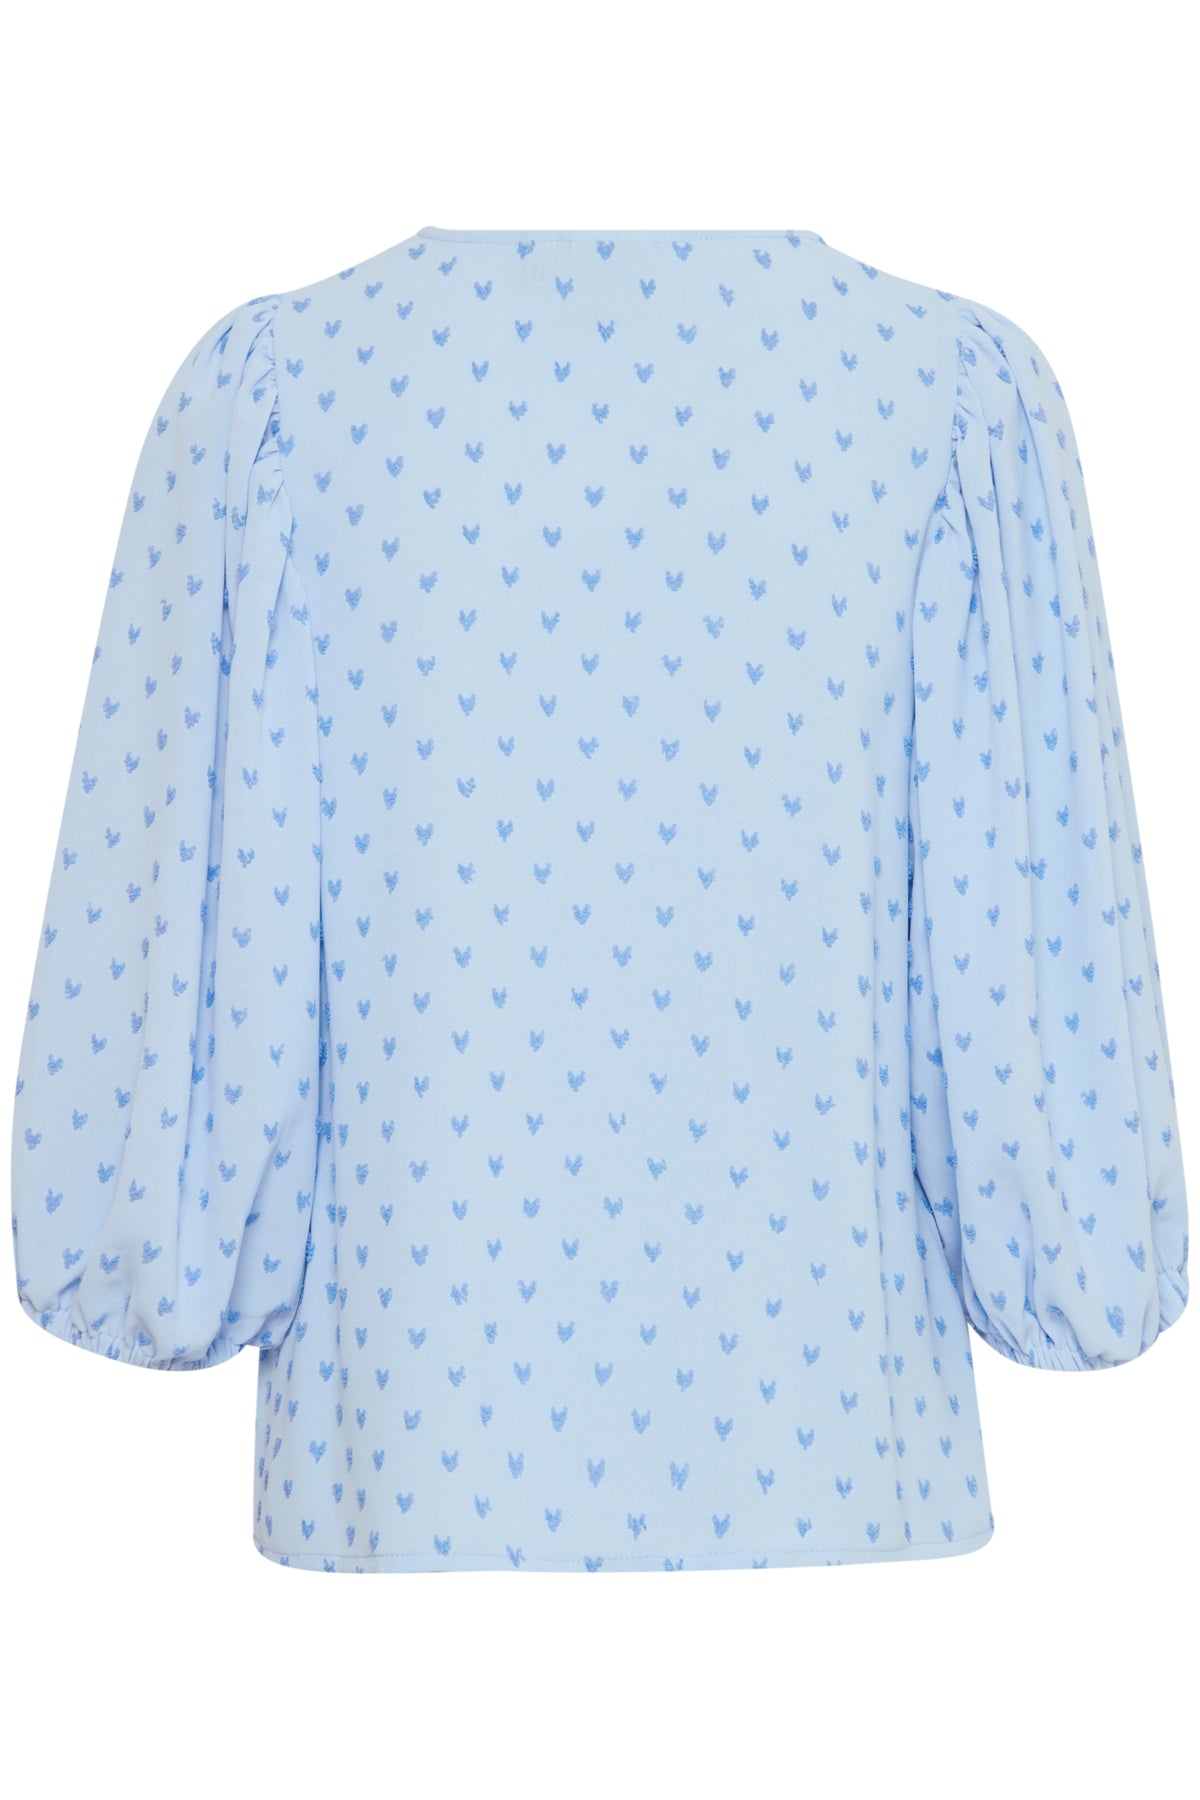 Sabella Blouse in Chambray Blue